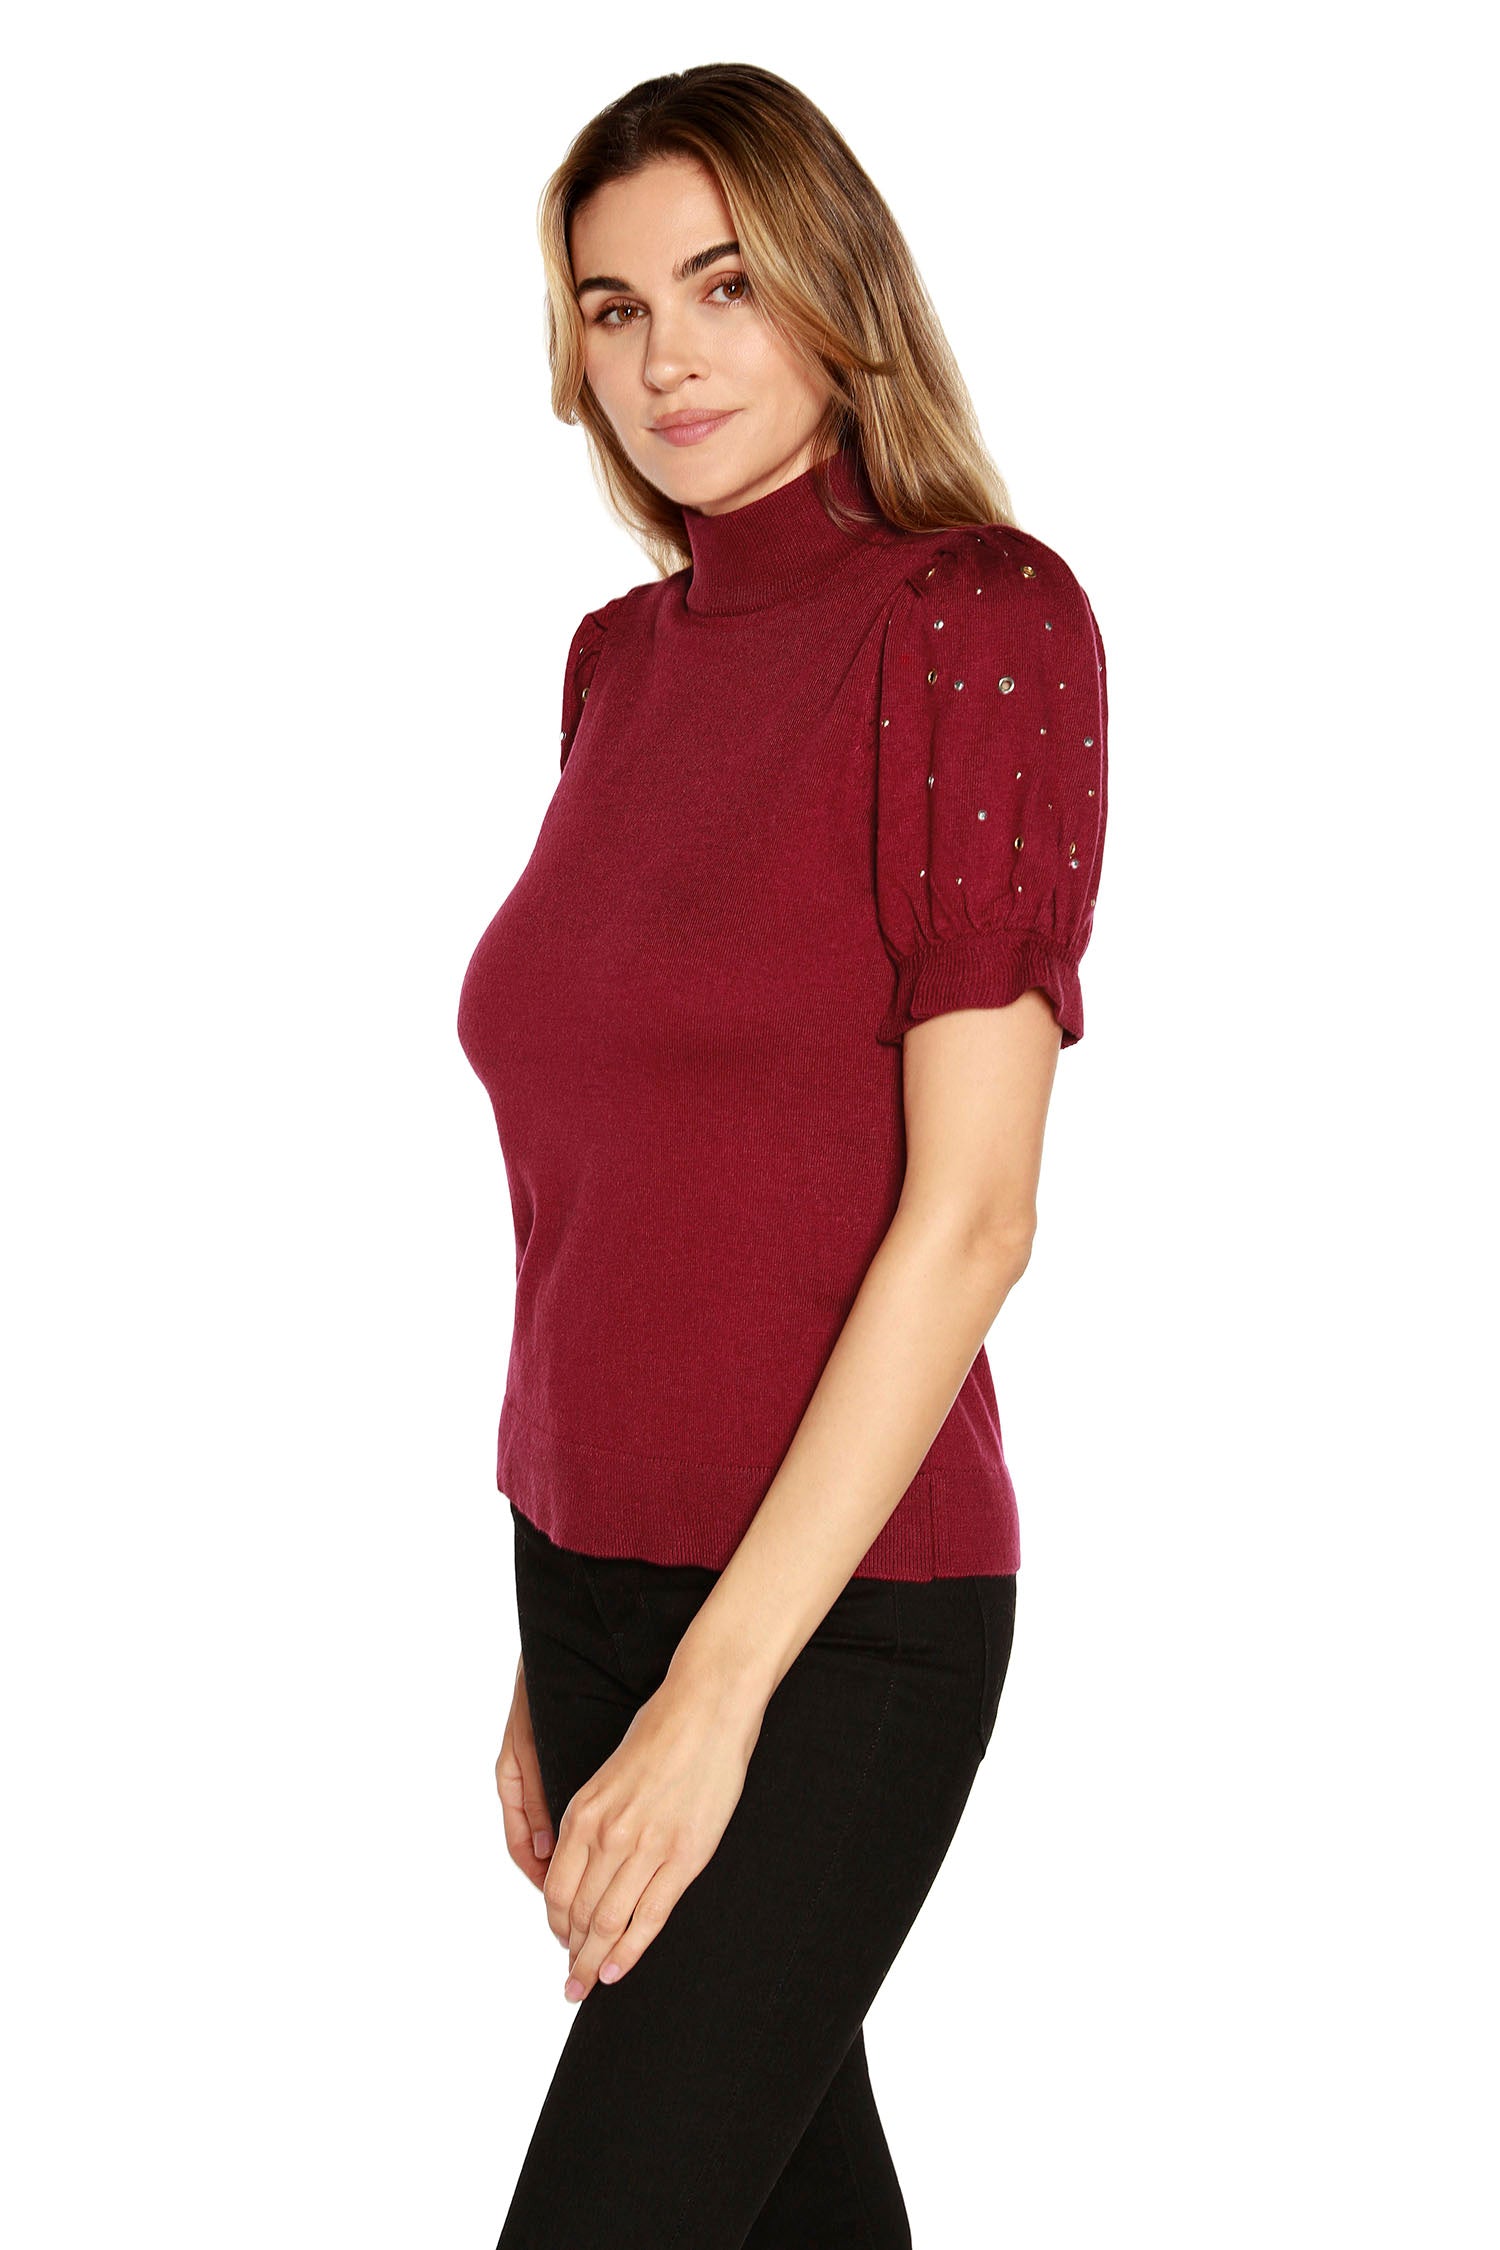 Women's Mock Neck Puff Sleeve Sweater with Grommet and Rhinestone Details